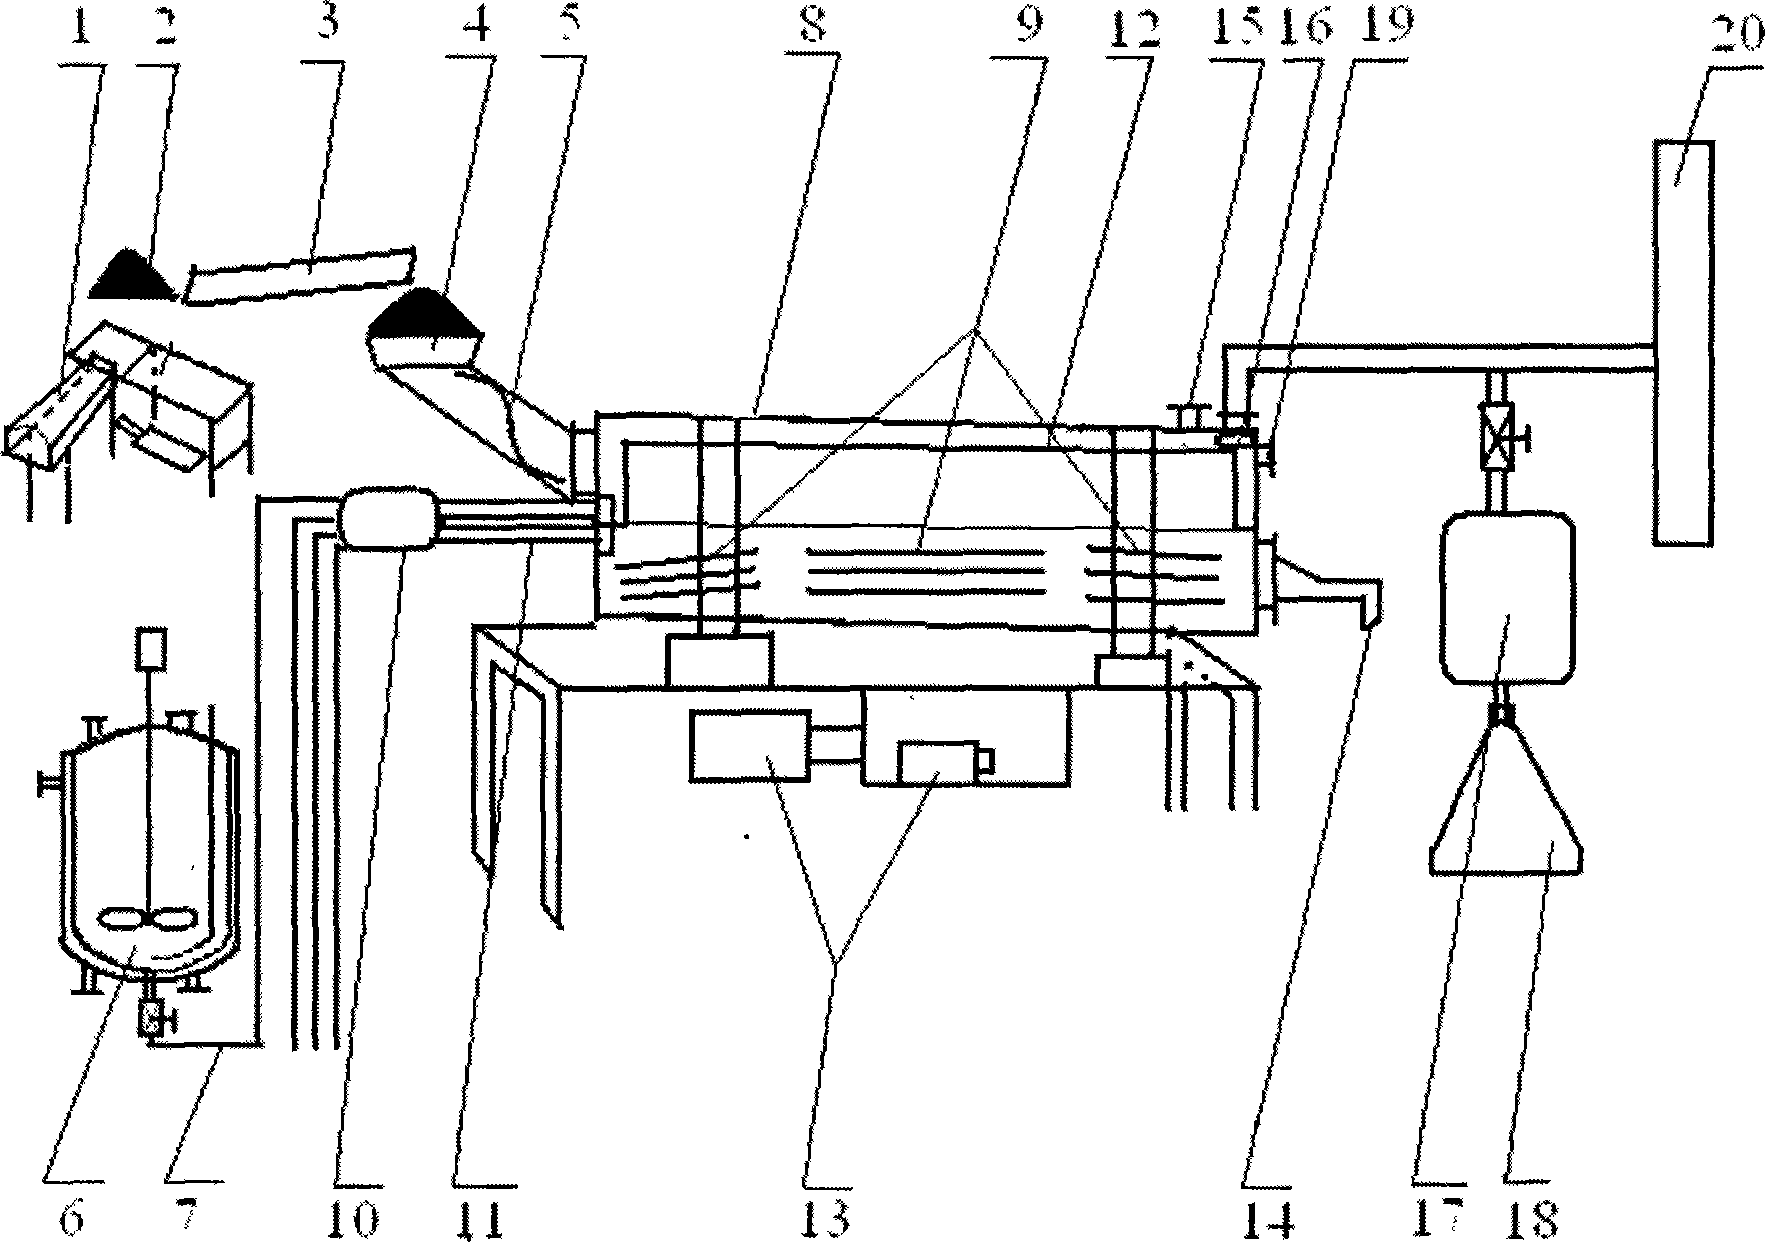 Fermentation / distillation integrated technique apparatus for producing alcohol from sugar